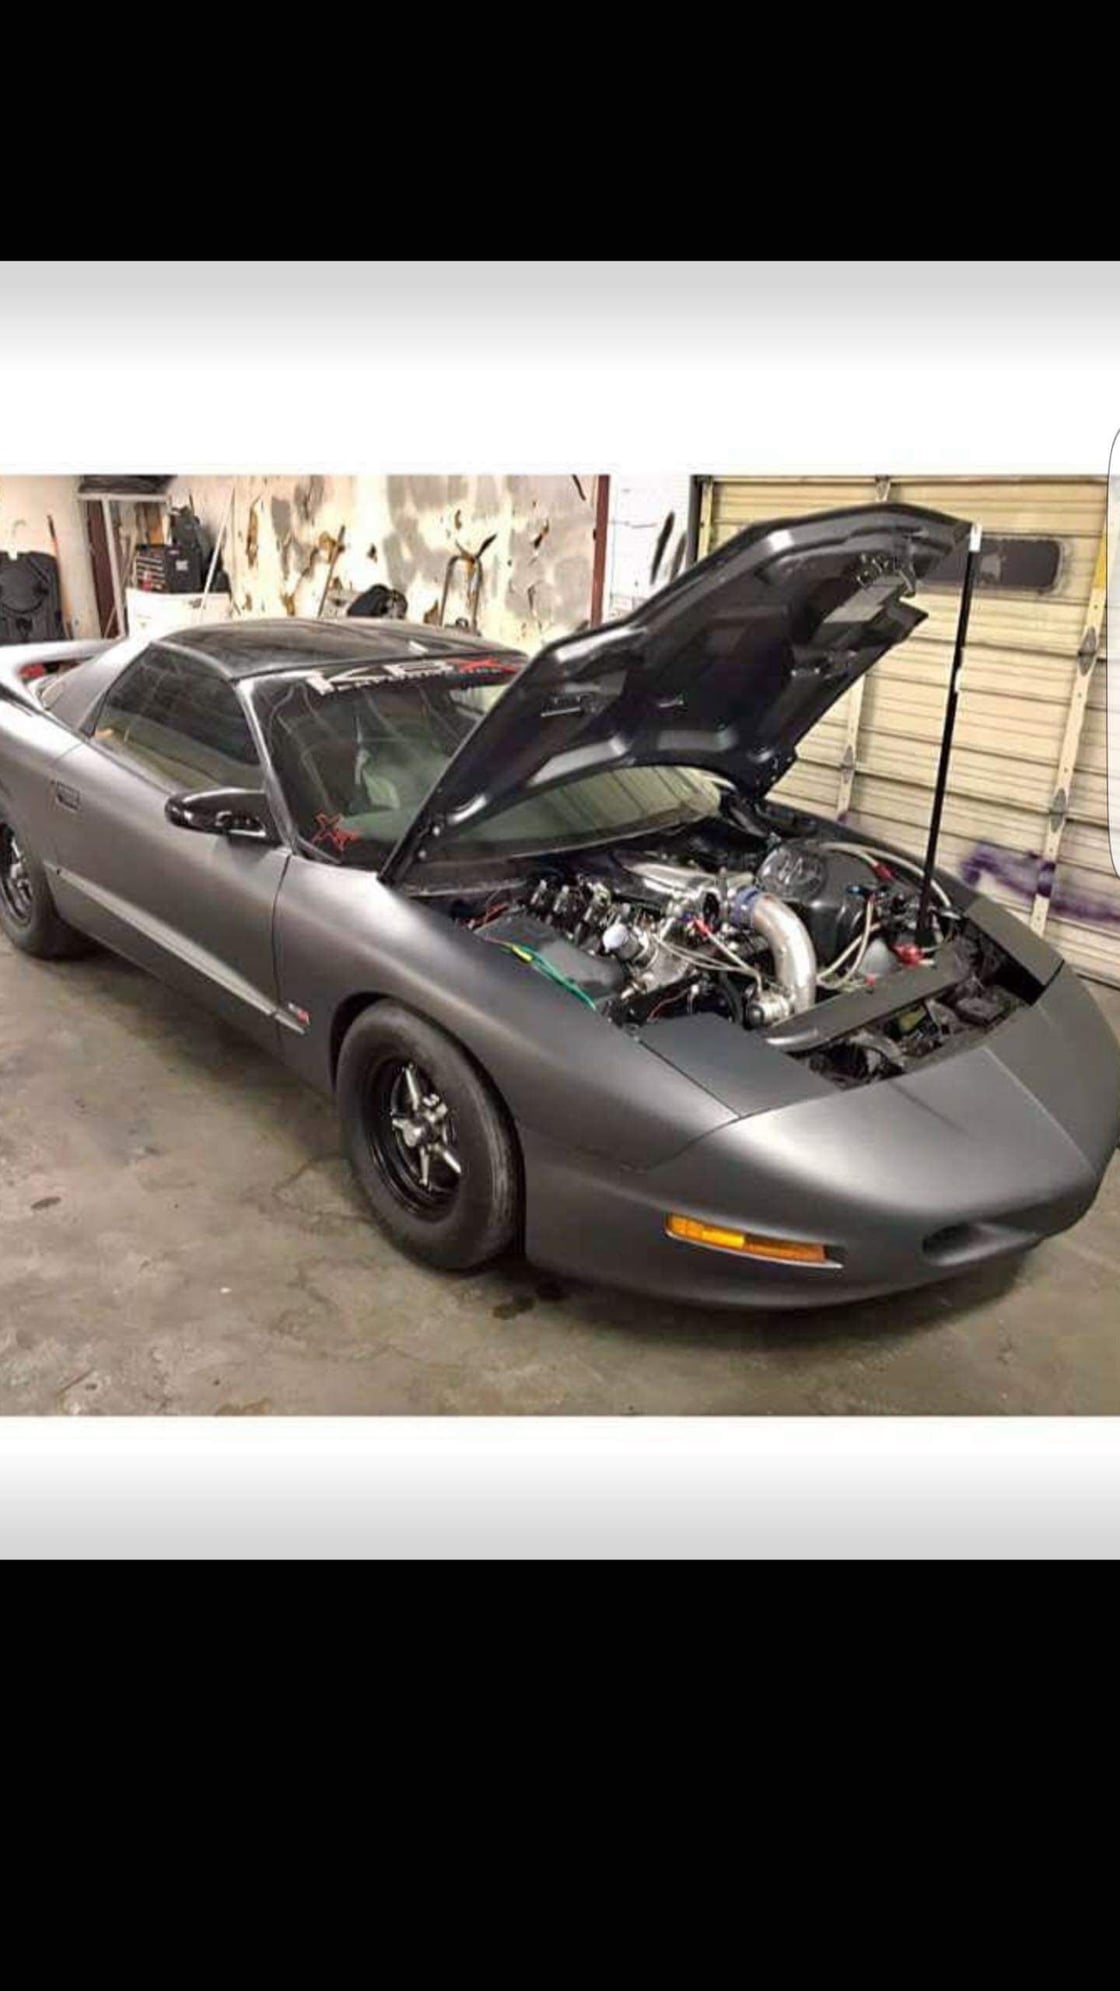 1996 Pontiac Firebird - 408 ls f1 94 procharger  Holley efi th400 12 bolt firebird trade or sell - Used - VIN 6299hskslo8 - 8 cyl - 2WD - Automatic - Hatchback - Summerton, SC 29148, United States